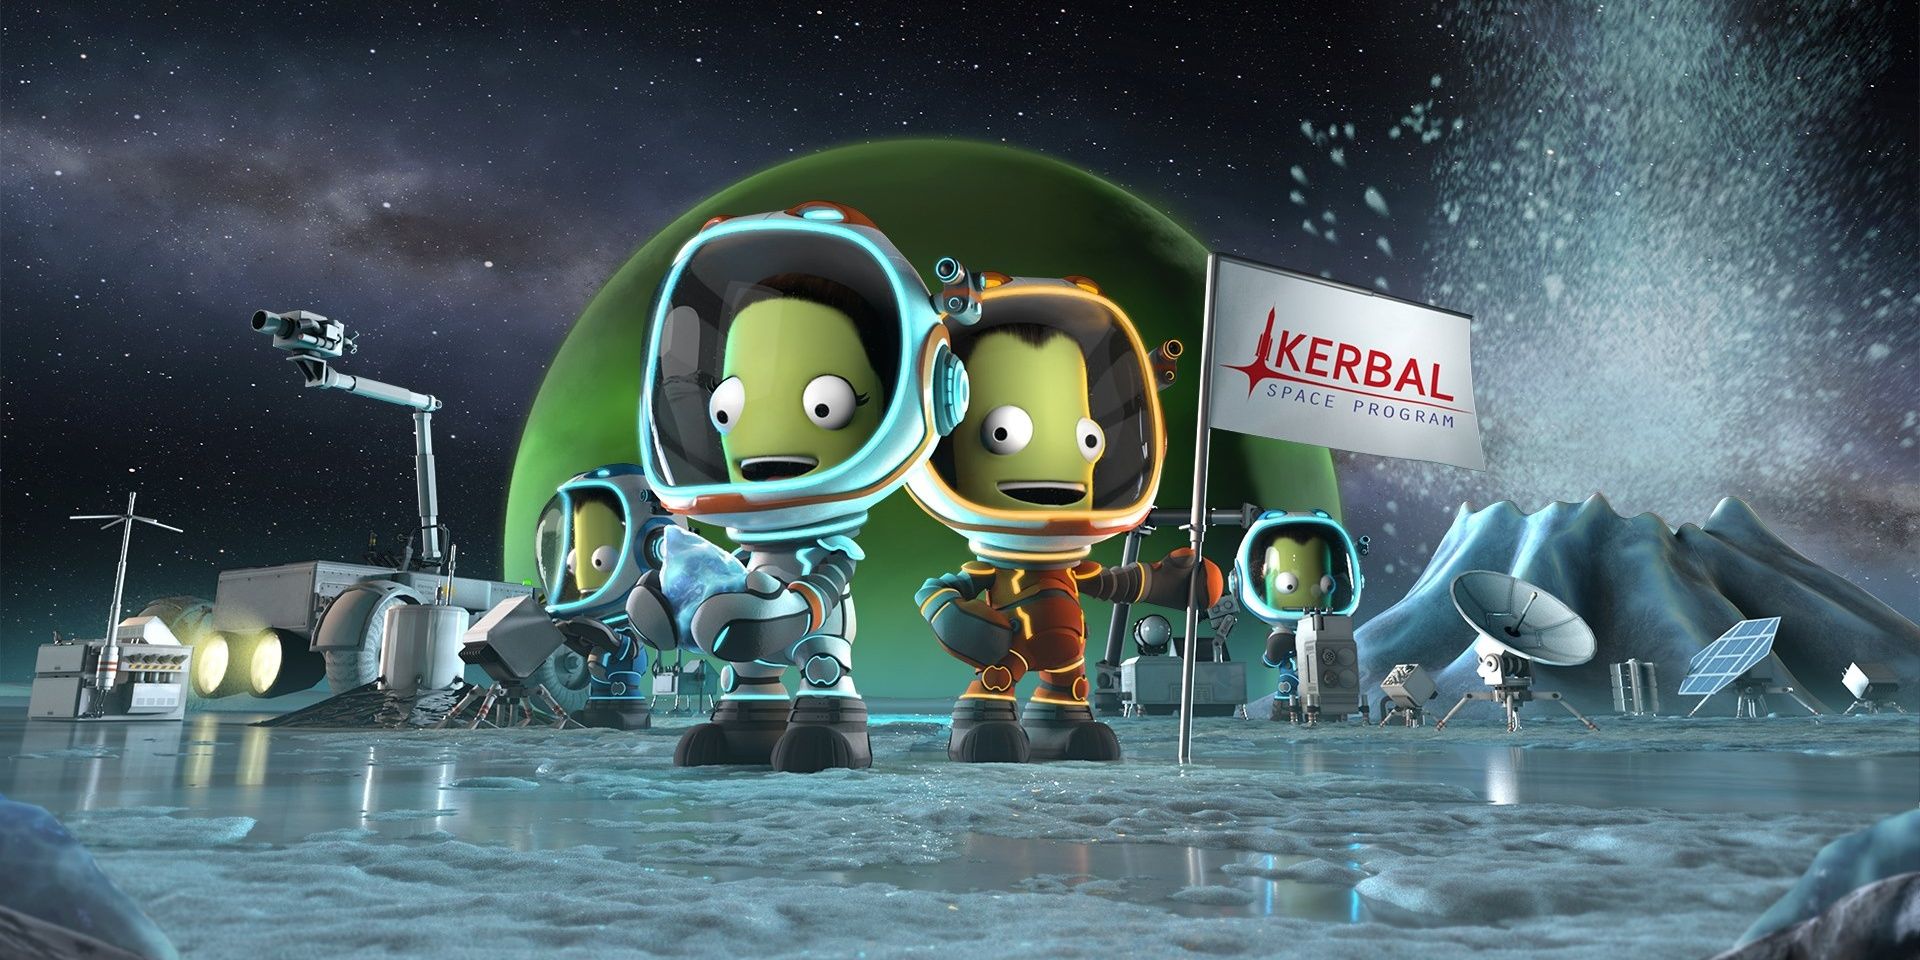 A promotional image for Kerbal Space Program featuring two Kerbals.